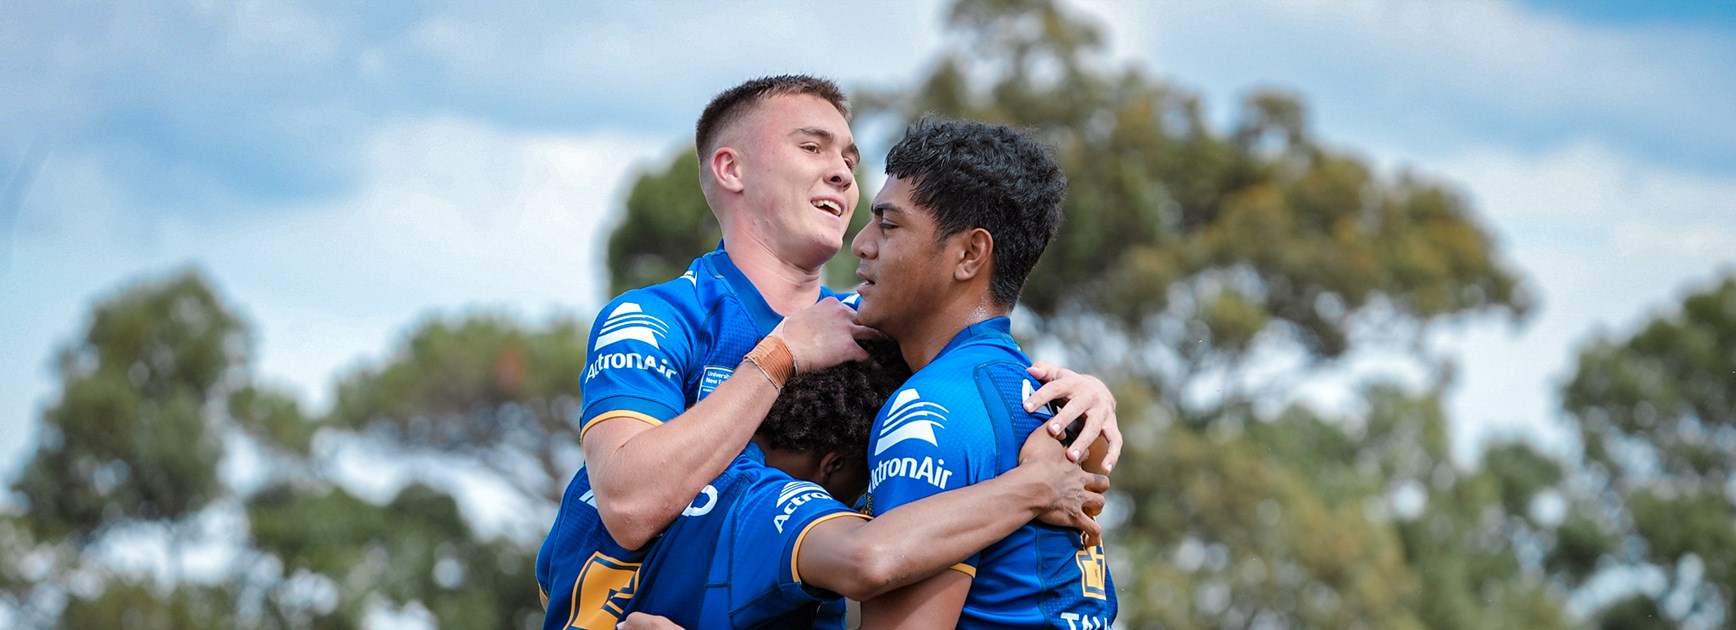 Junior Reps Wrap: Eels win every grade in home whitewash